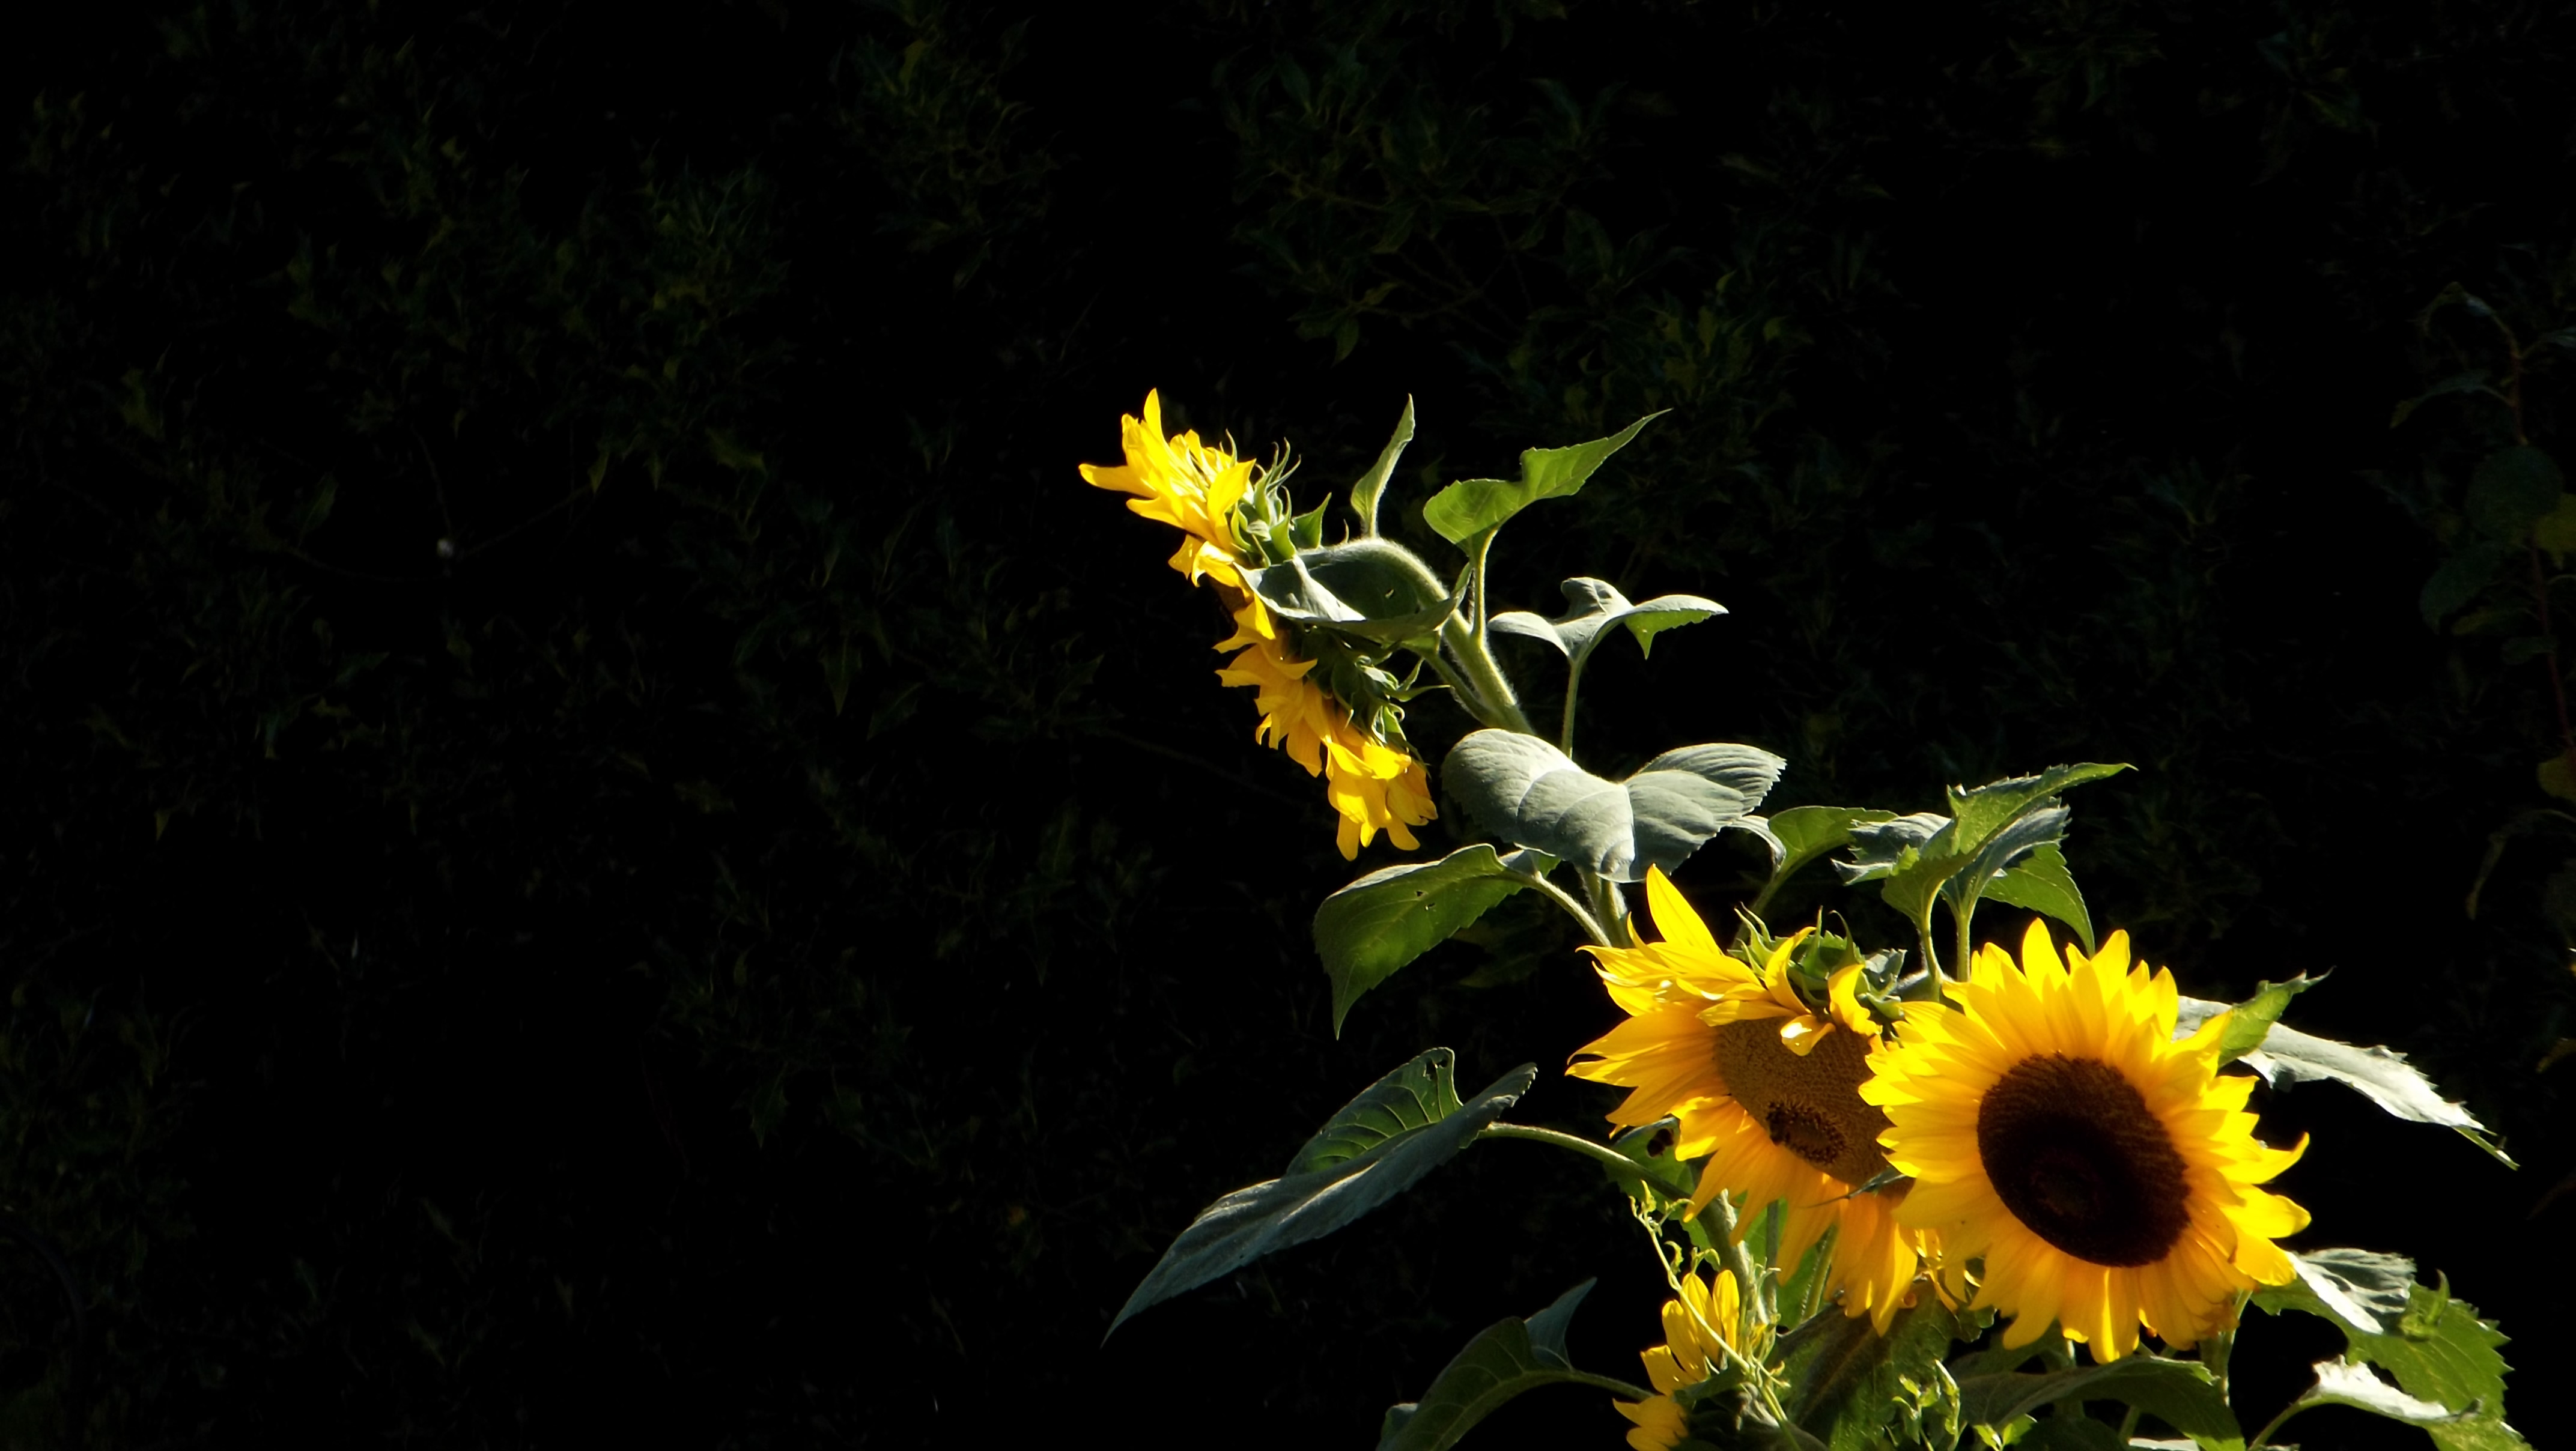 Photoshop sunflower, earth, flowers 8k Backgrounds